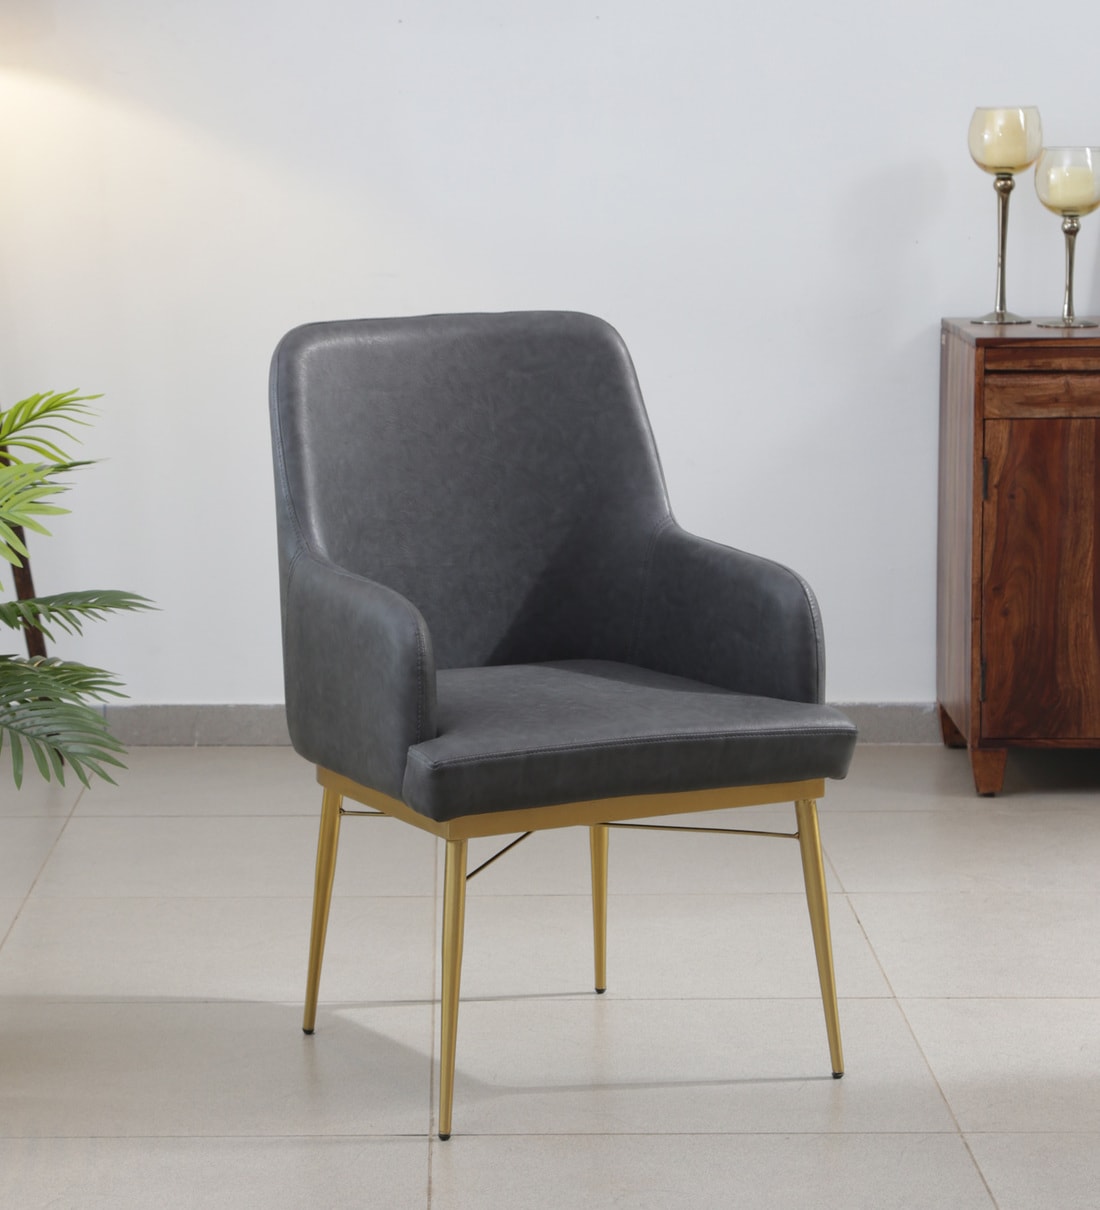 Dalores Leatherette Arm Chair In Brass Finish